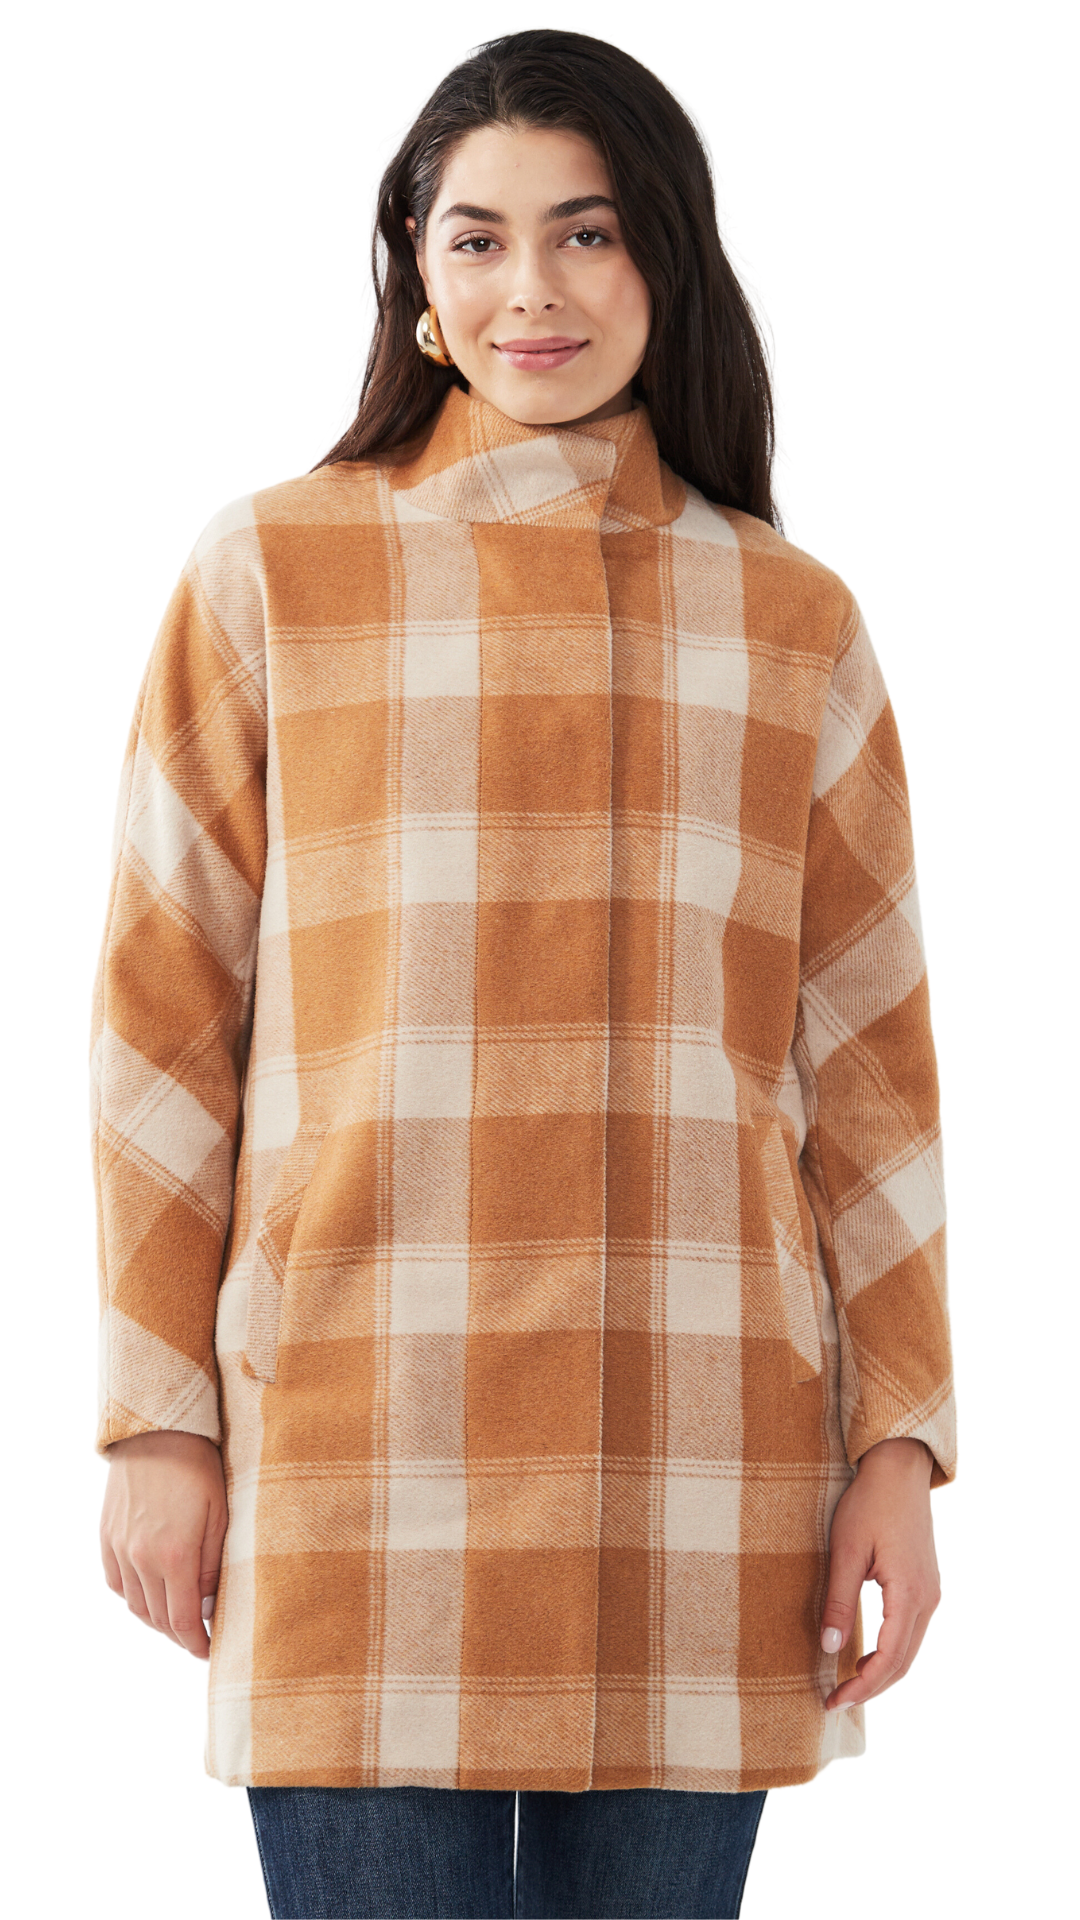 Plaid Snap Front Cocoon Shacket. REGULAR PRICE $184.95